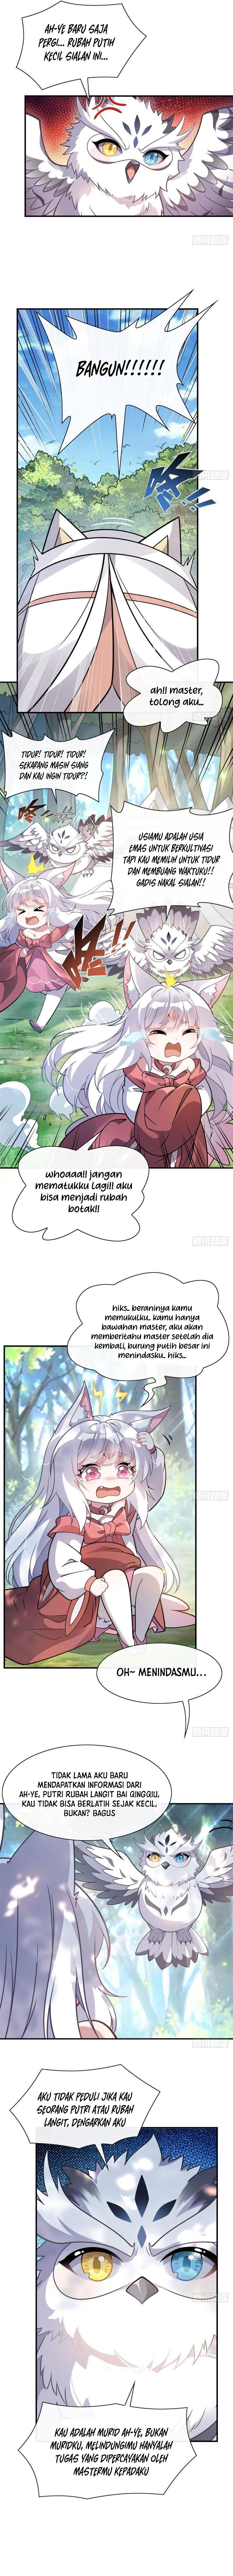 Dilarang COPAS - situs resmi www.mangacanblog.com - Komik my female apprentices are all big shots from the future 189 - chapter 189 190 Indonesia my female apprentices are all big shots from the future 189 - chapter 189 Terbaru 2|Baca Manga Komik Indonesia|Mangacan